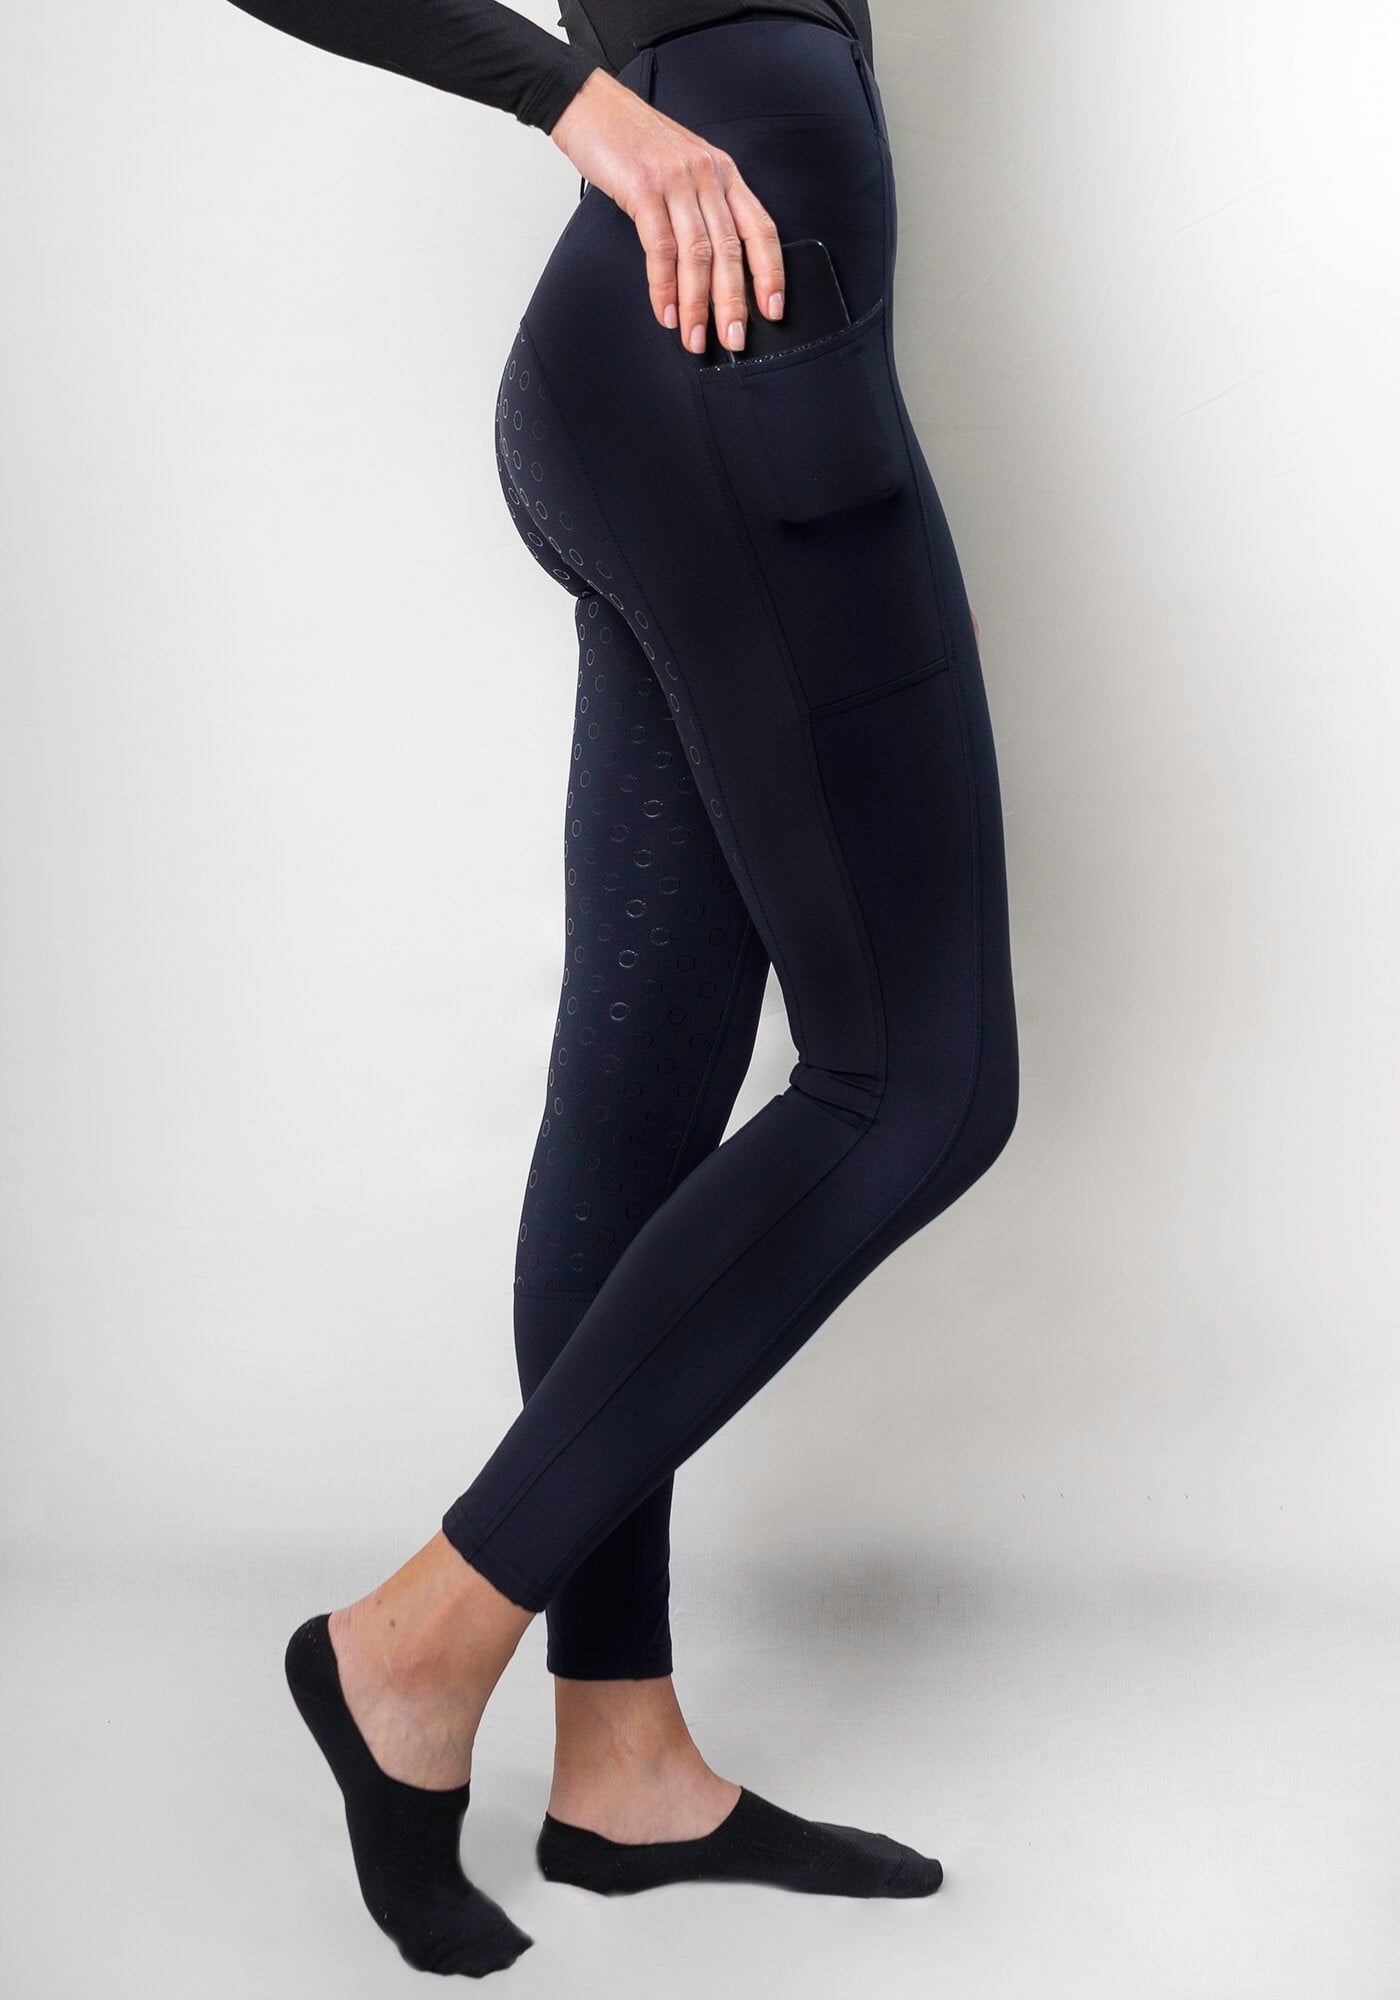 Riding leggings with cell phone pocket